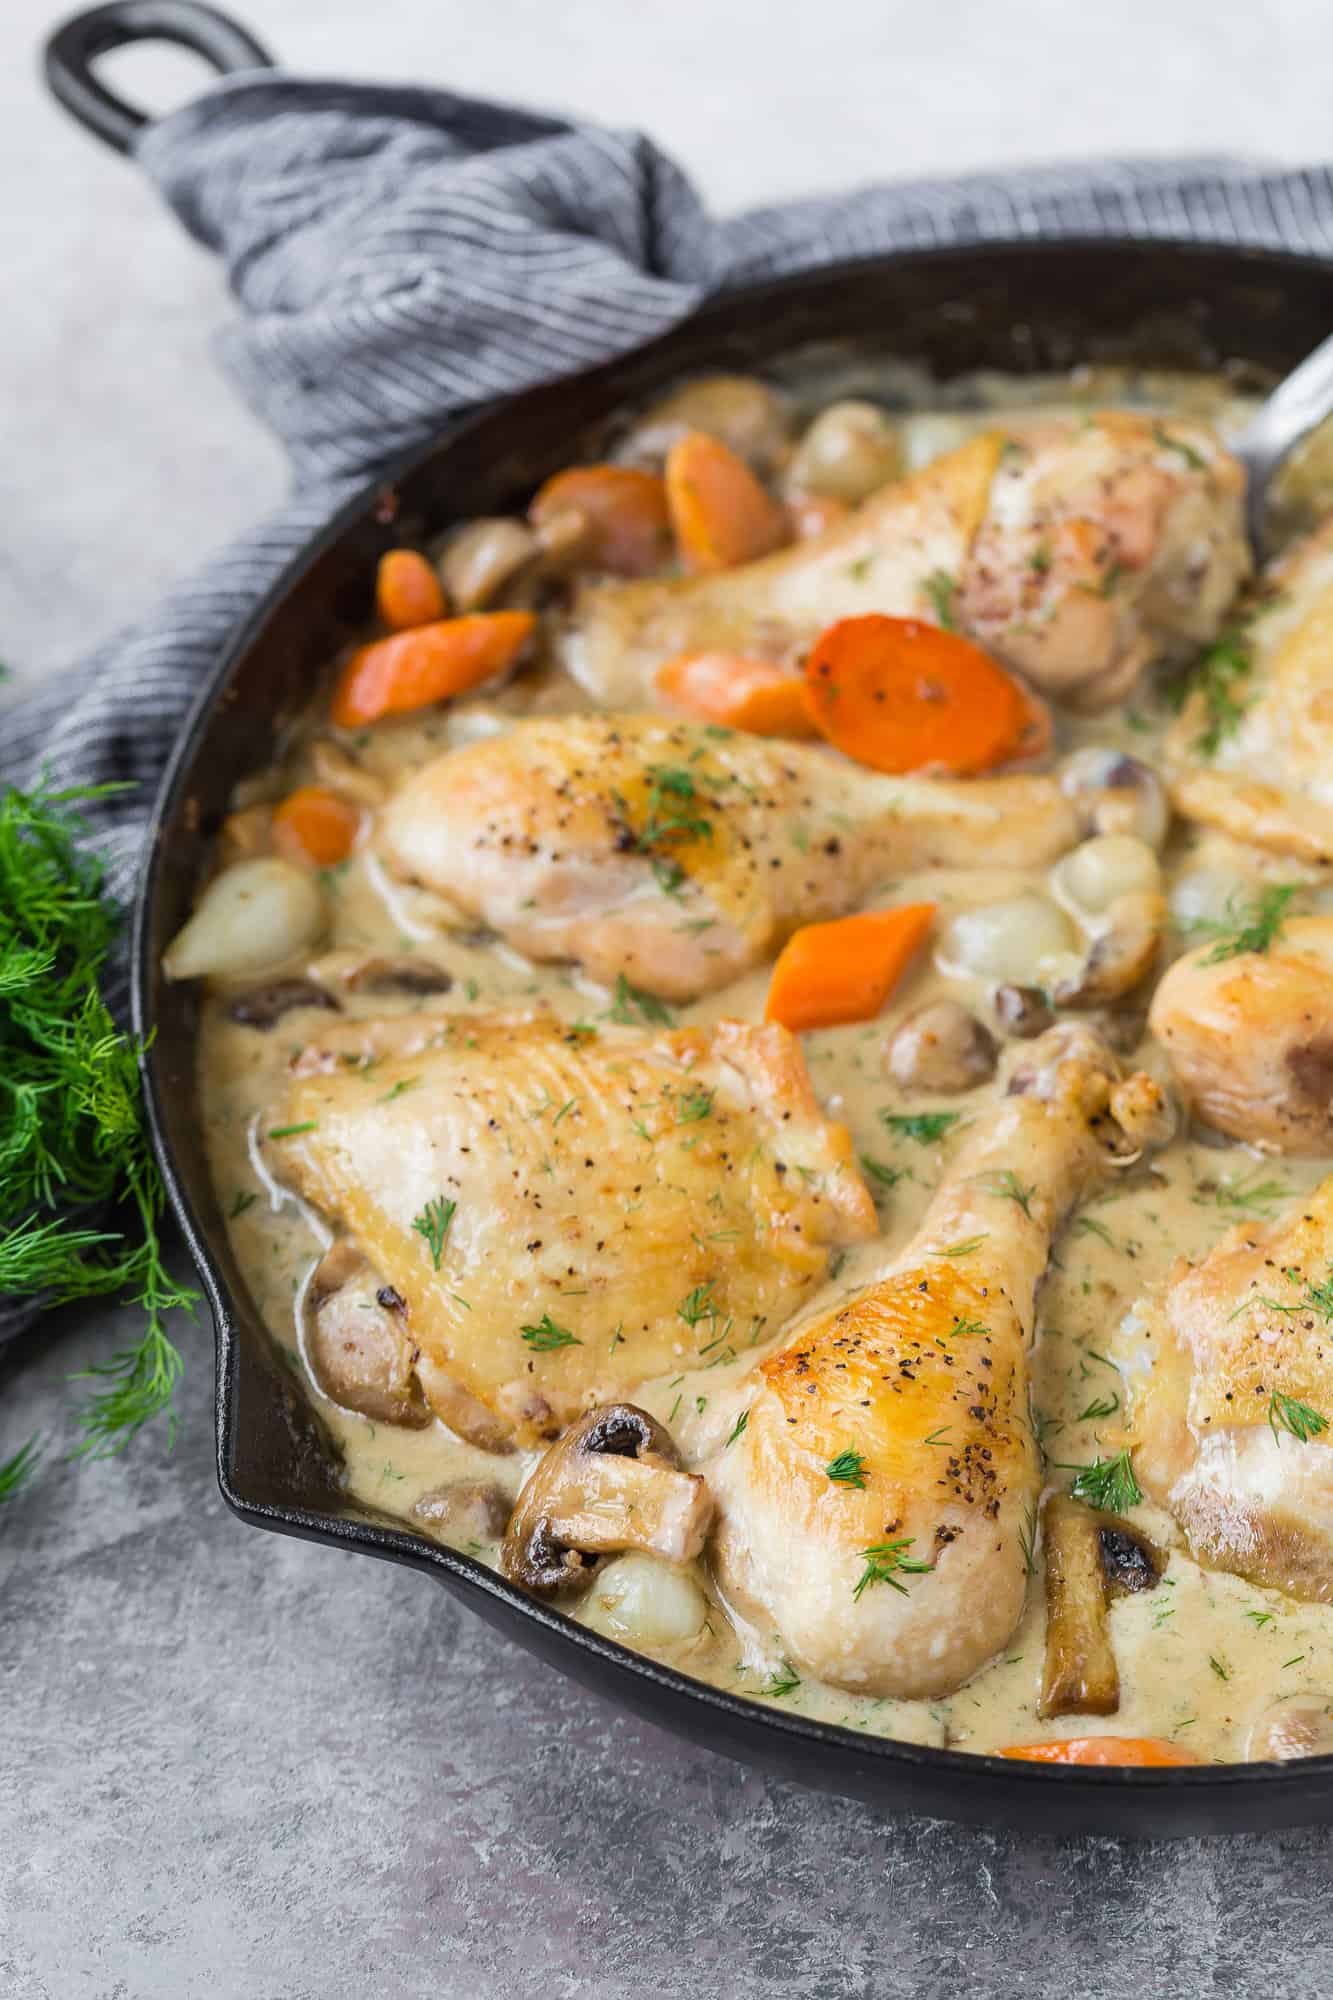 Browned chicken in a pan with gravy and vegetables.